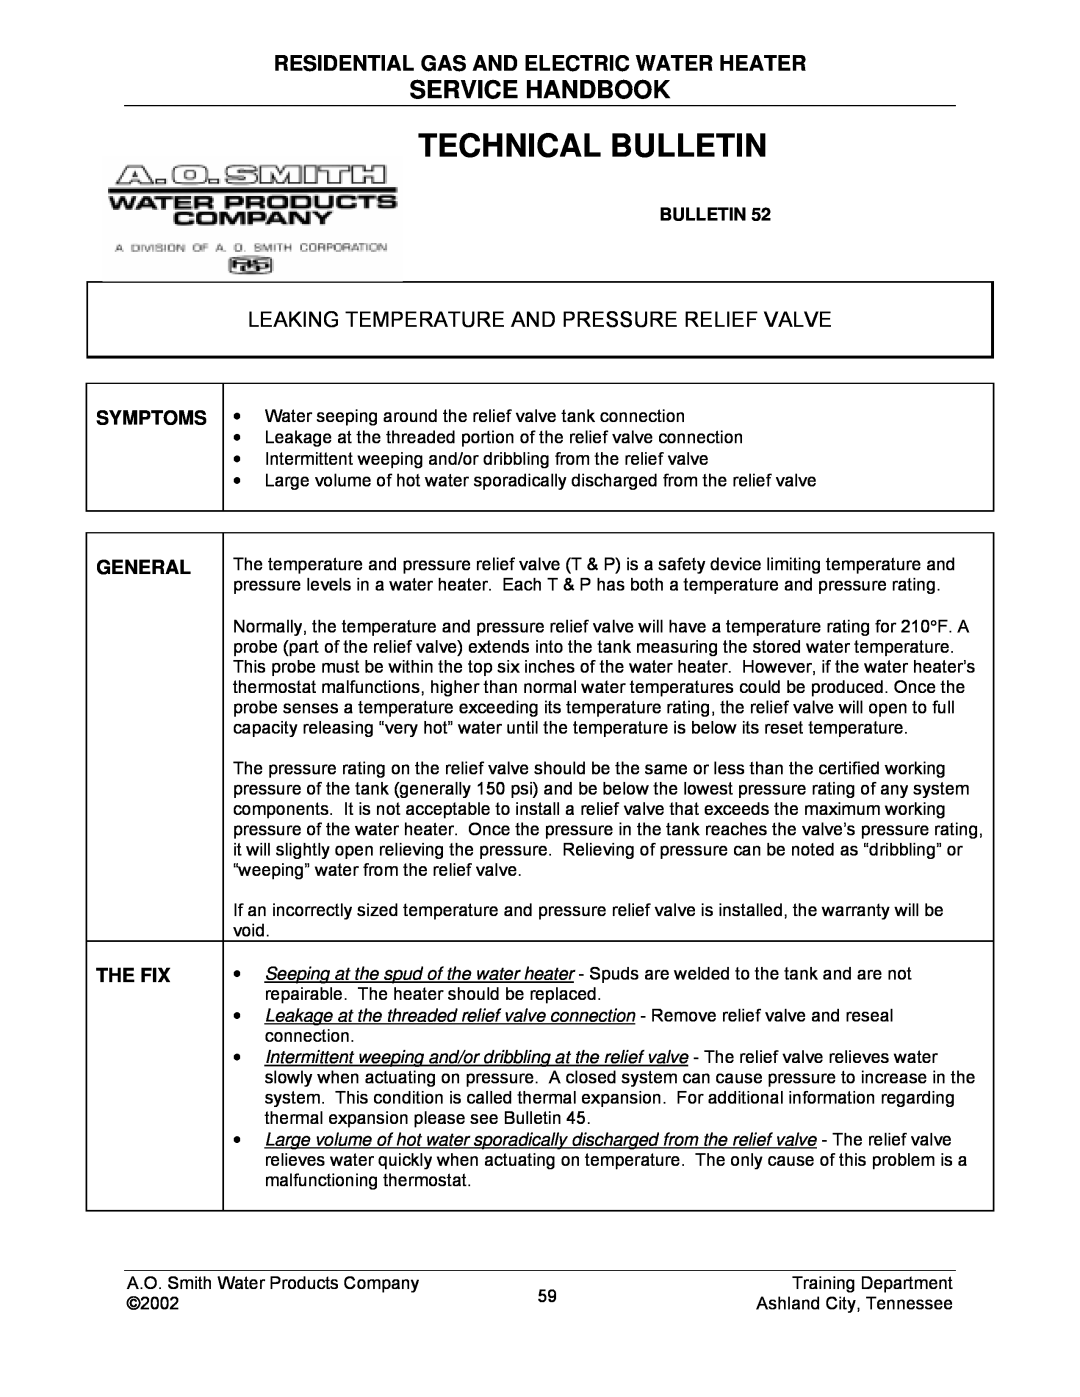 A.O. Smith TC-049-R2 manual Technical Bulletin, Service Handbook, Residential Gas And Electric Water Heater 